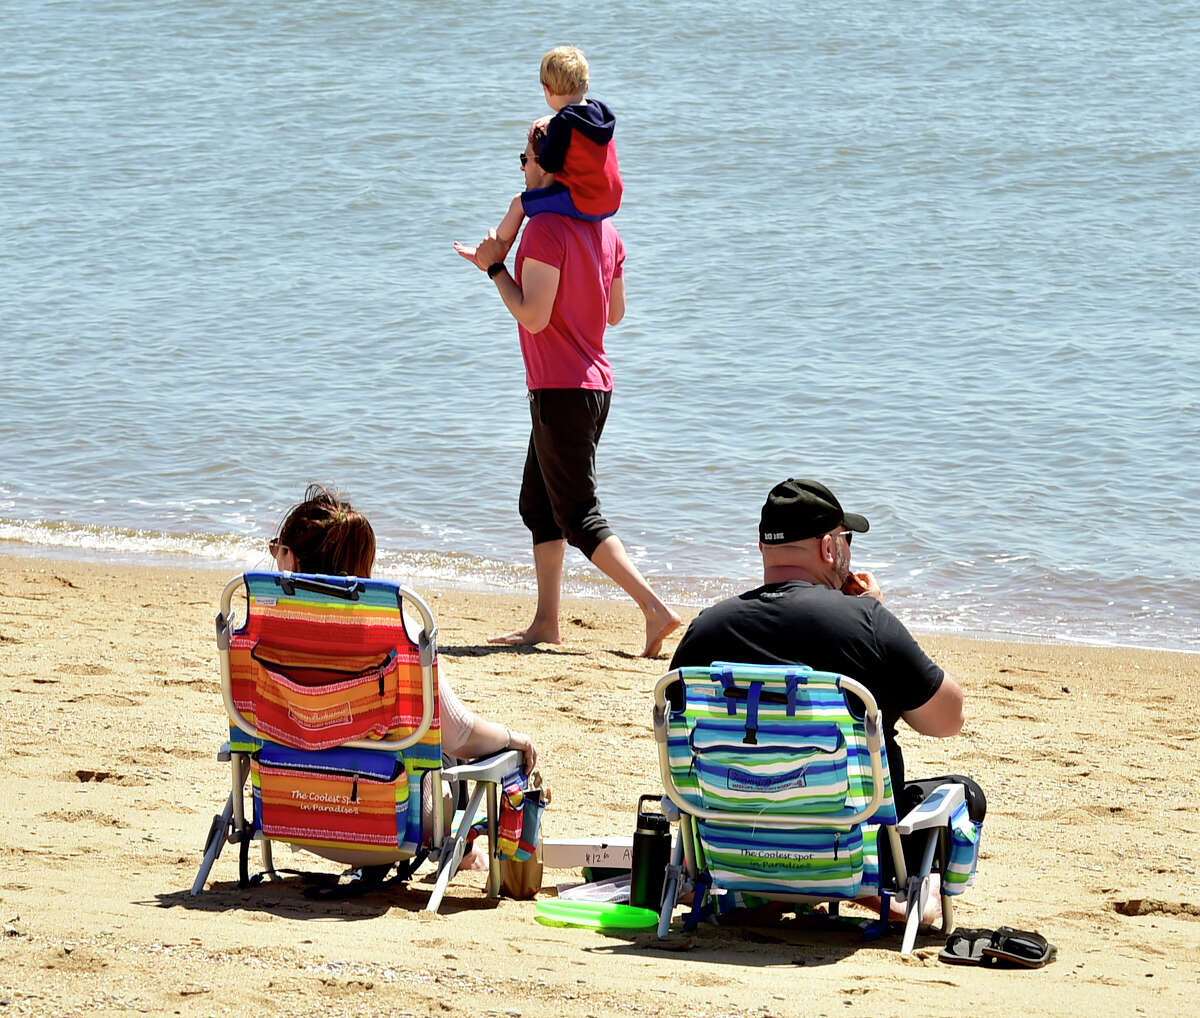 Madison, Connecticut, Saturday, May 1, 2020: People enjoy the warmth and sunshine Saturday at the Surf Club town beach in Madison during the Covid-19 / Coronavirus pandemic.